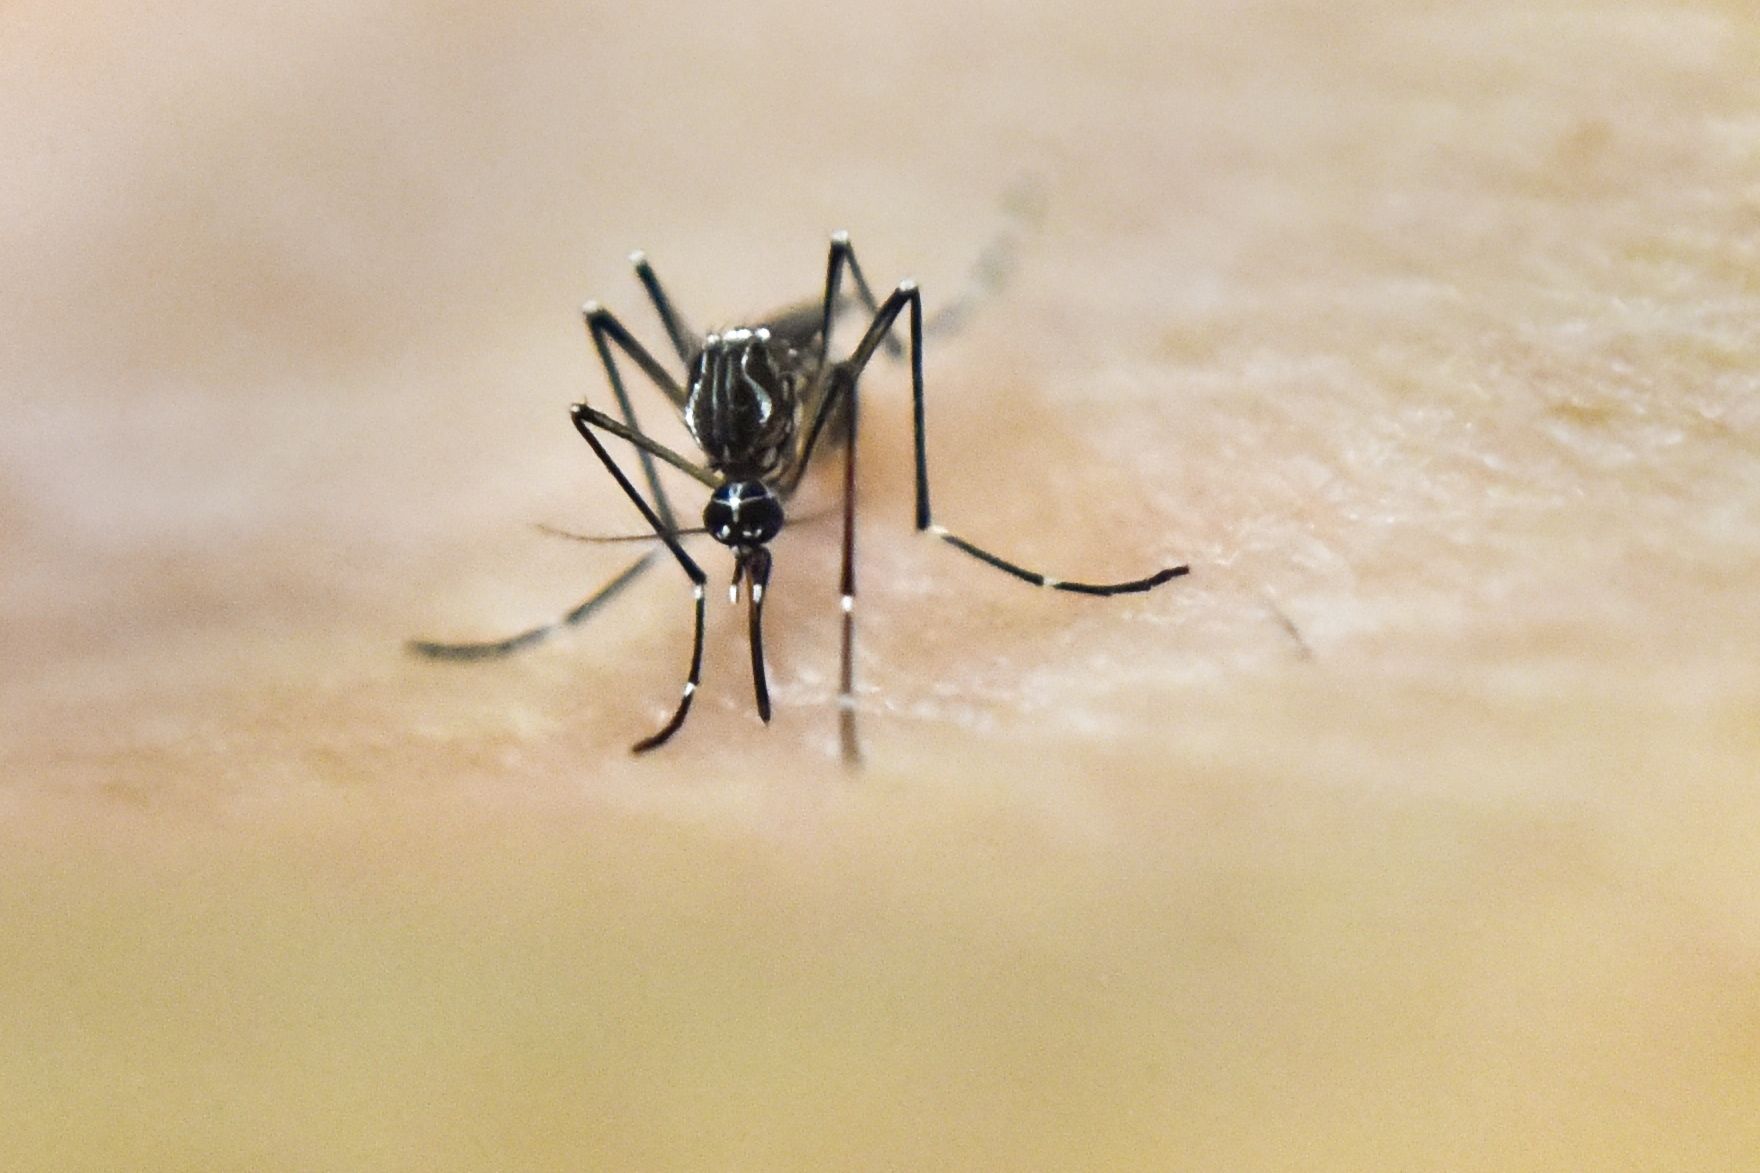 An Aedes Aegypti mosquito on human skin.